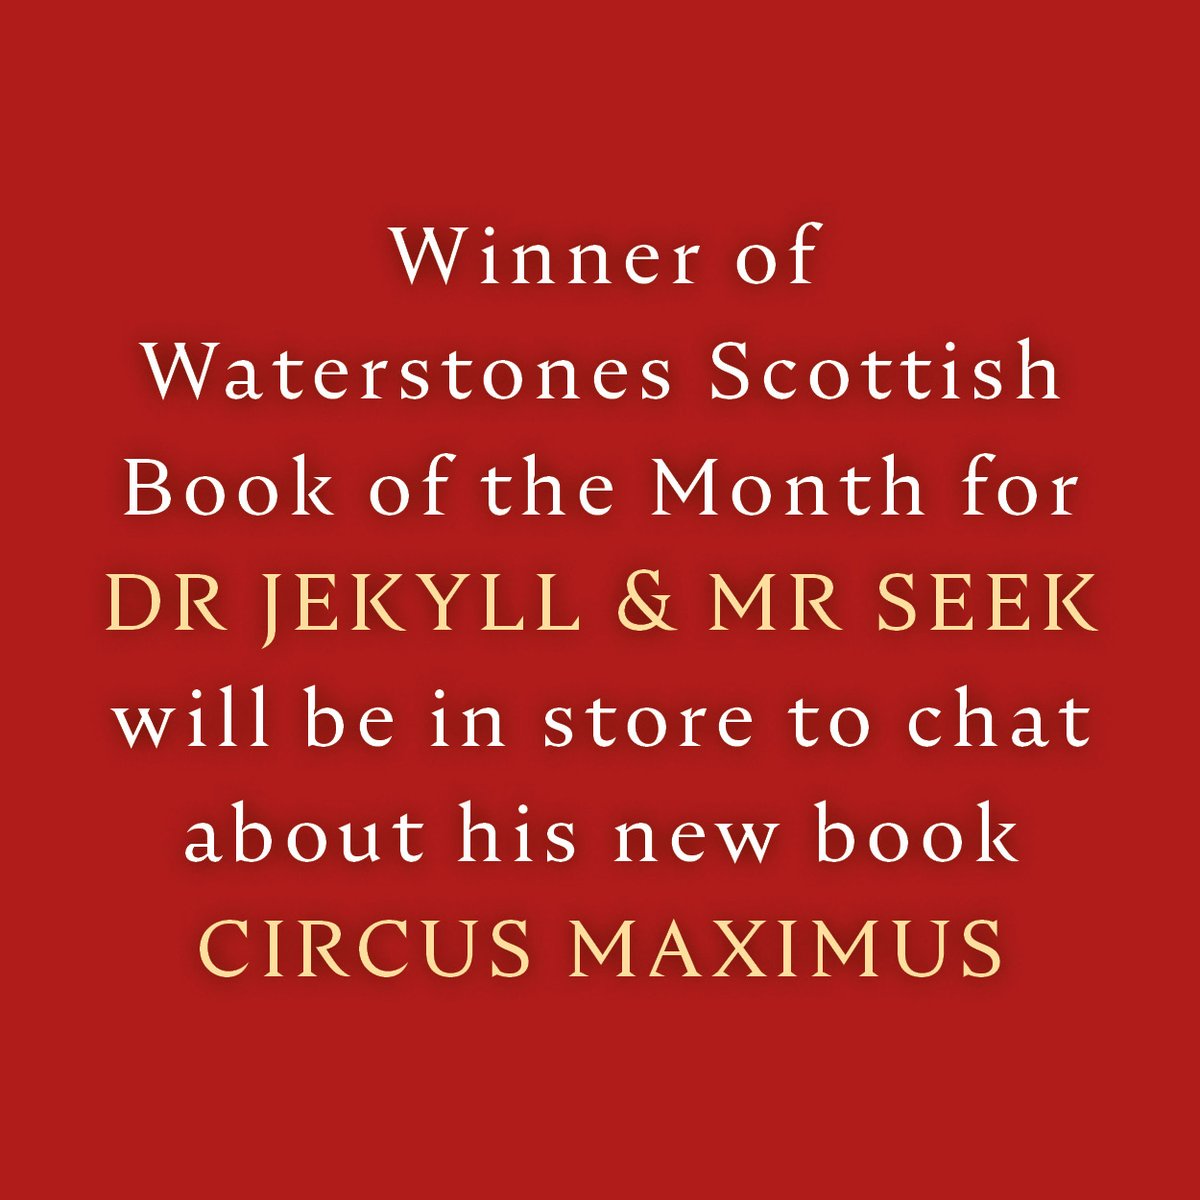 AUTHOR EVENT - We have Anthony O'Neill in store on 7th May at 7pm to chat about his latest novel 'Circus Maximus' Anthony previously wrote one of our Scottish Books of the Month, the incredible 'Dr Jekyll & Mr Seek'